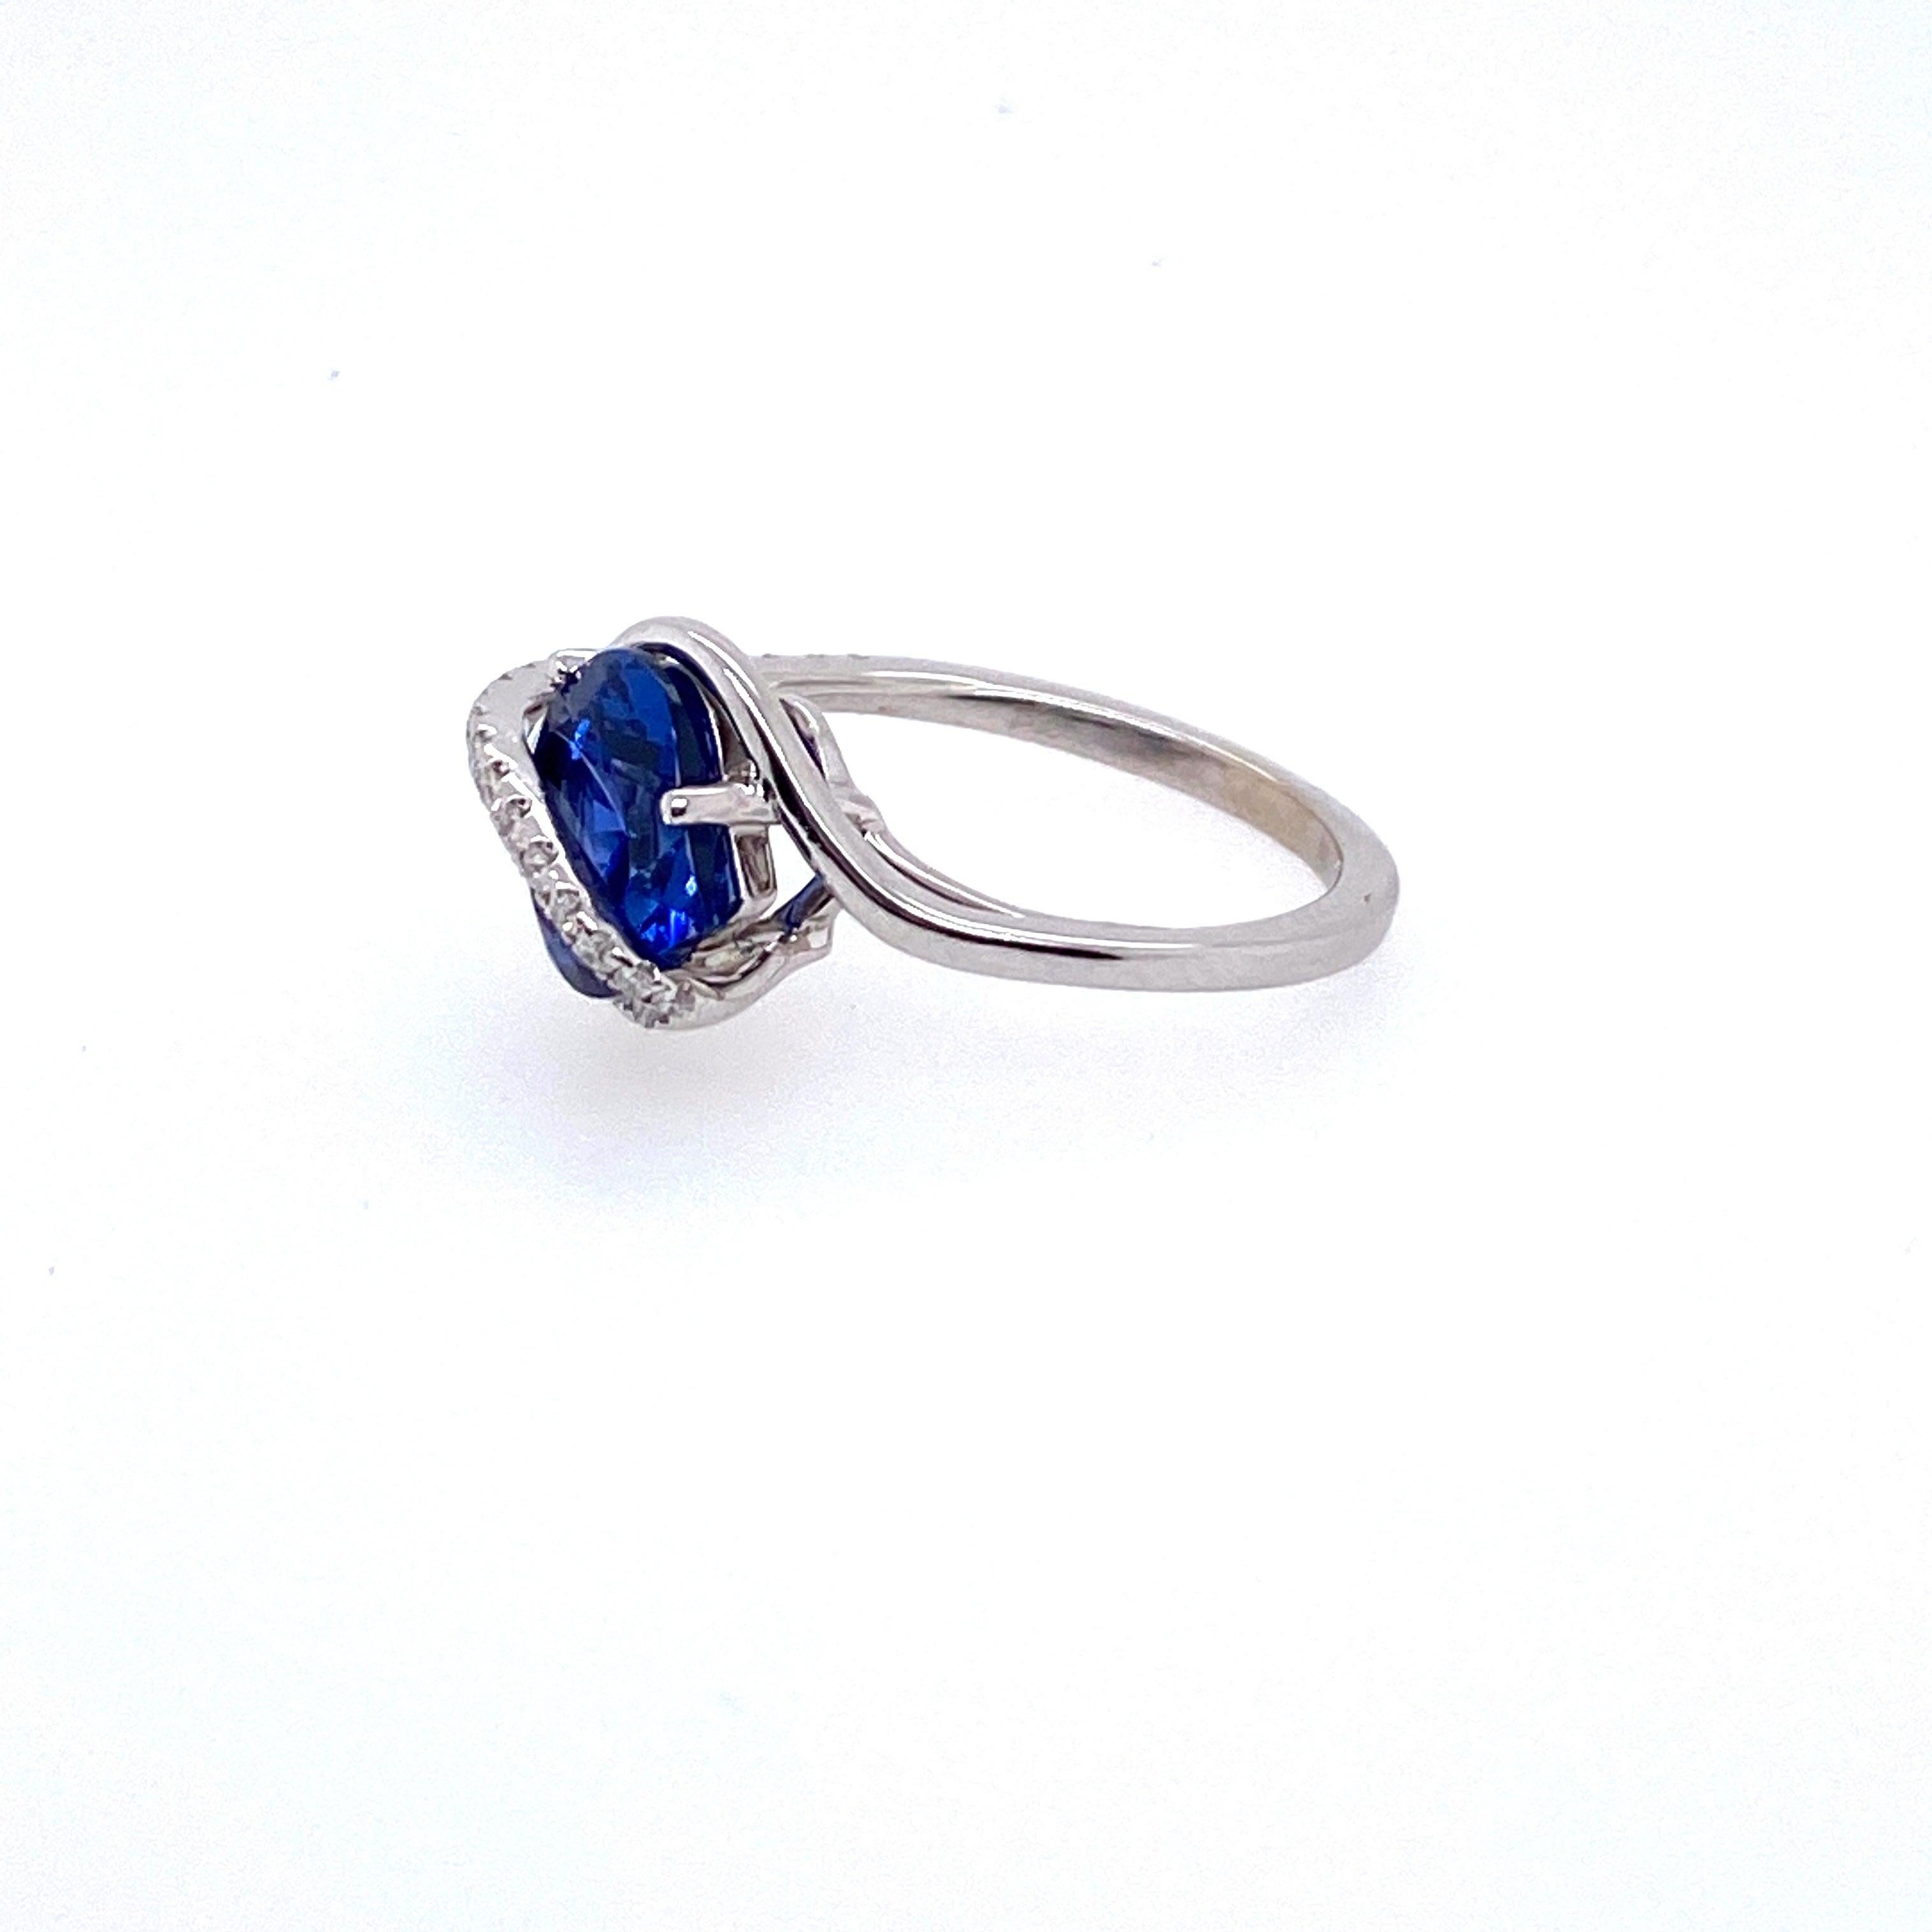 chatham sapphire meaning